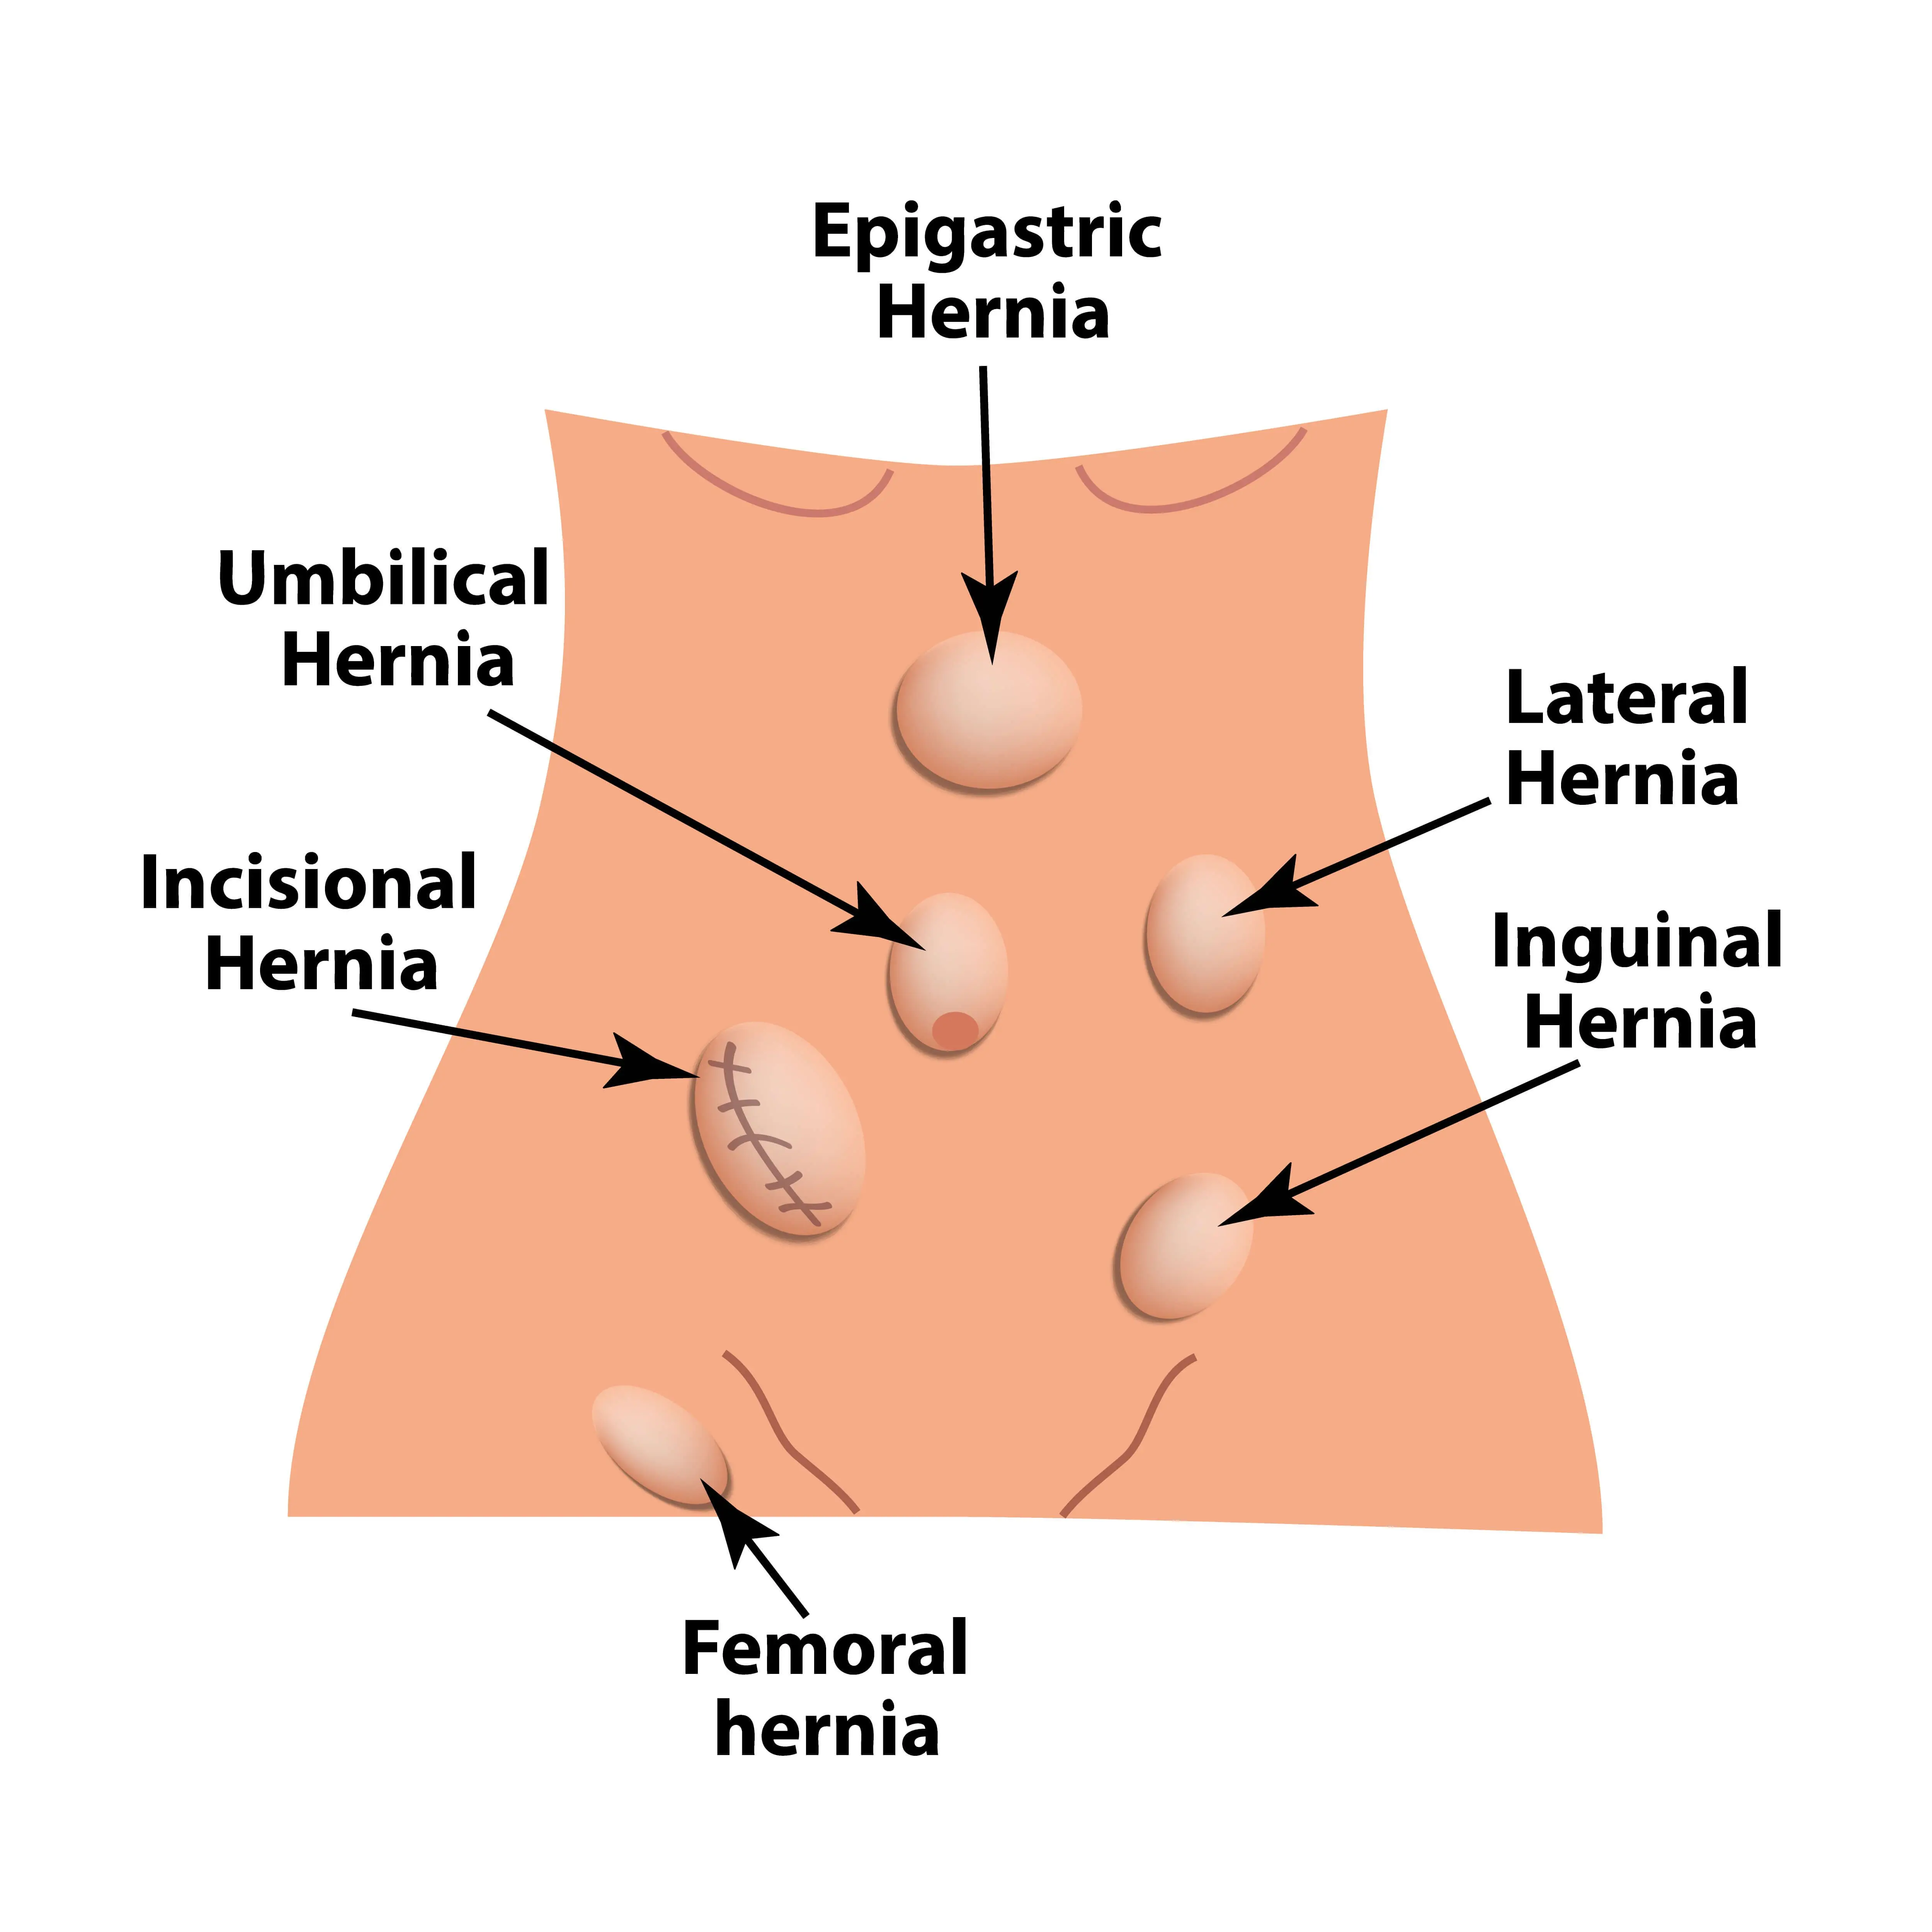 Hernias can occur in many parts of the body.